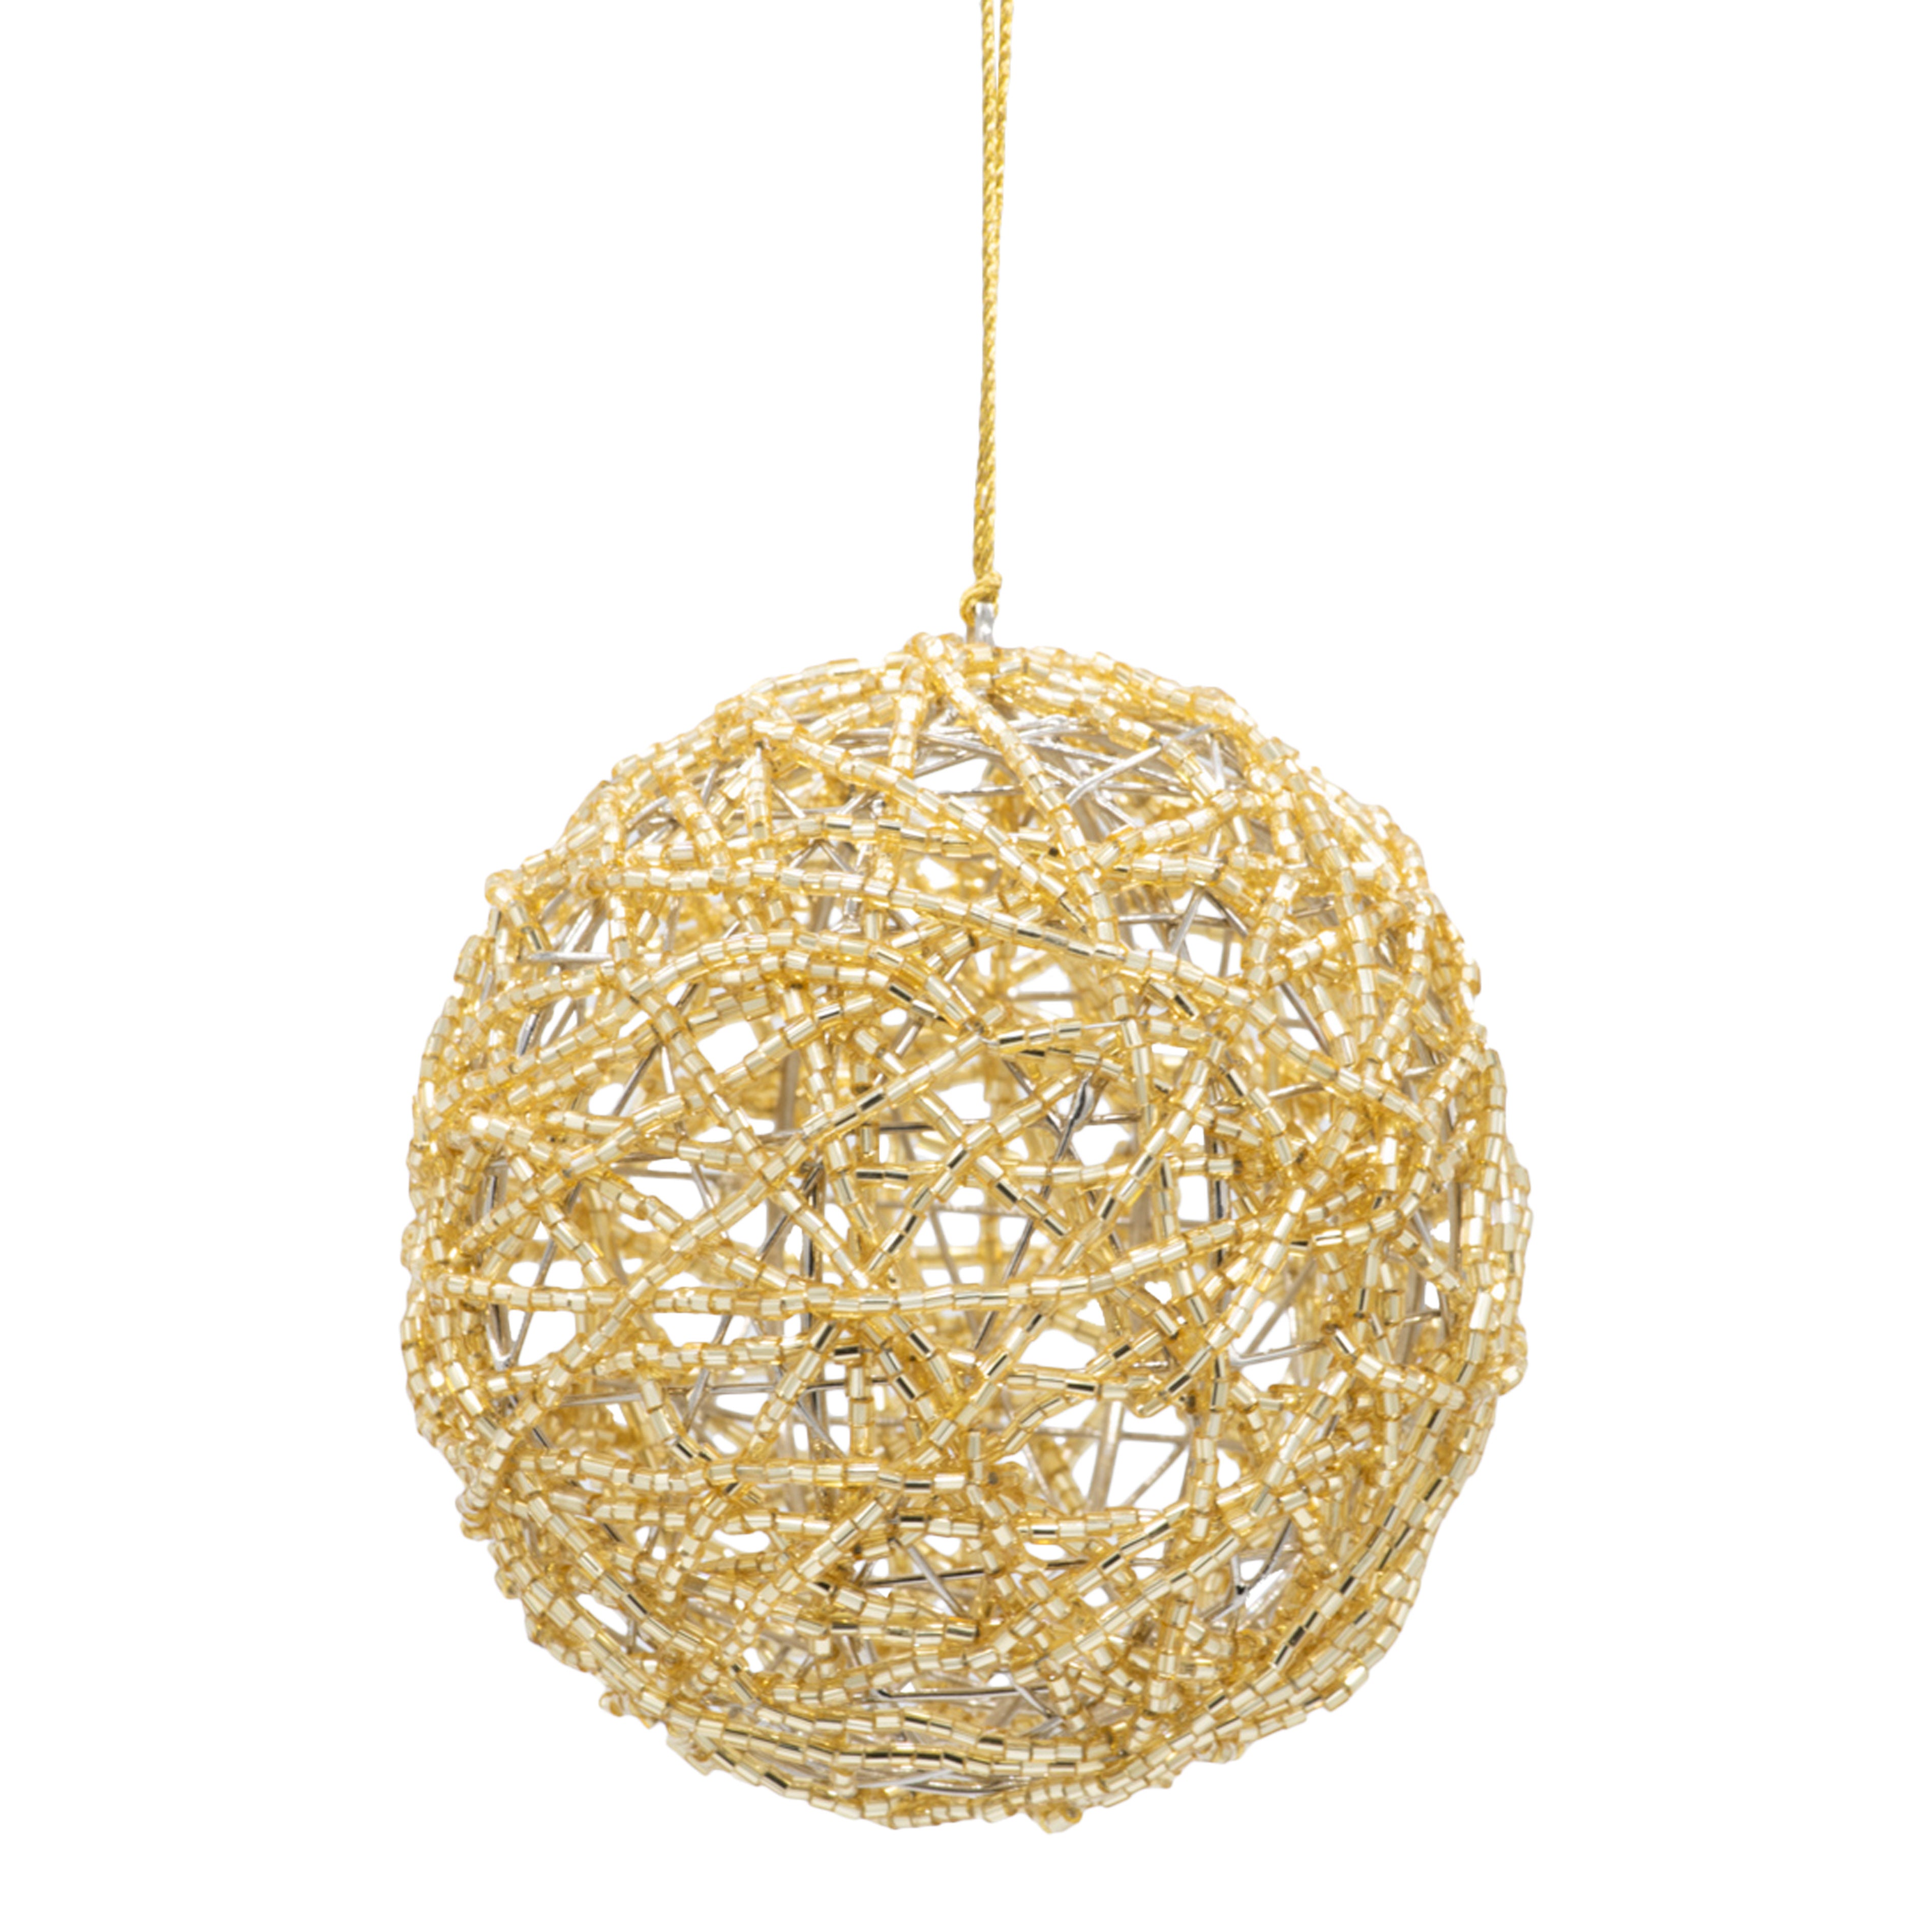 Gold beaded bauble on a white background